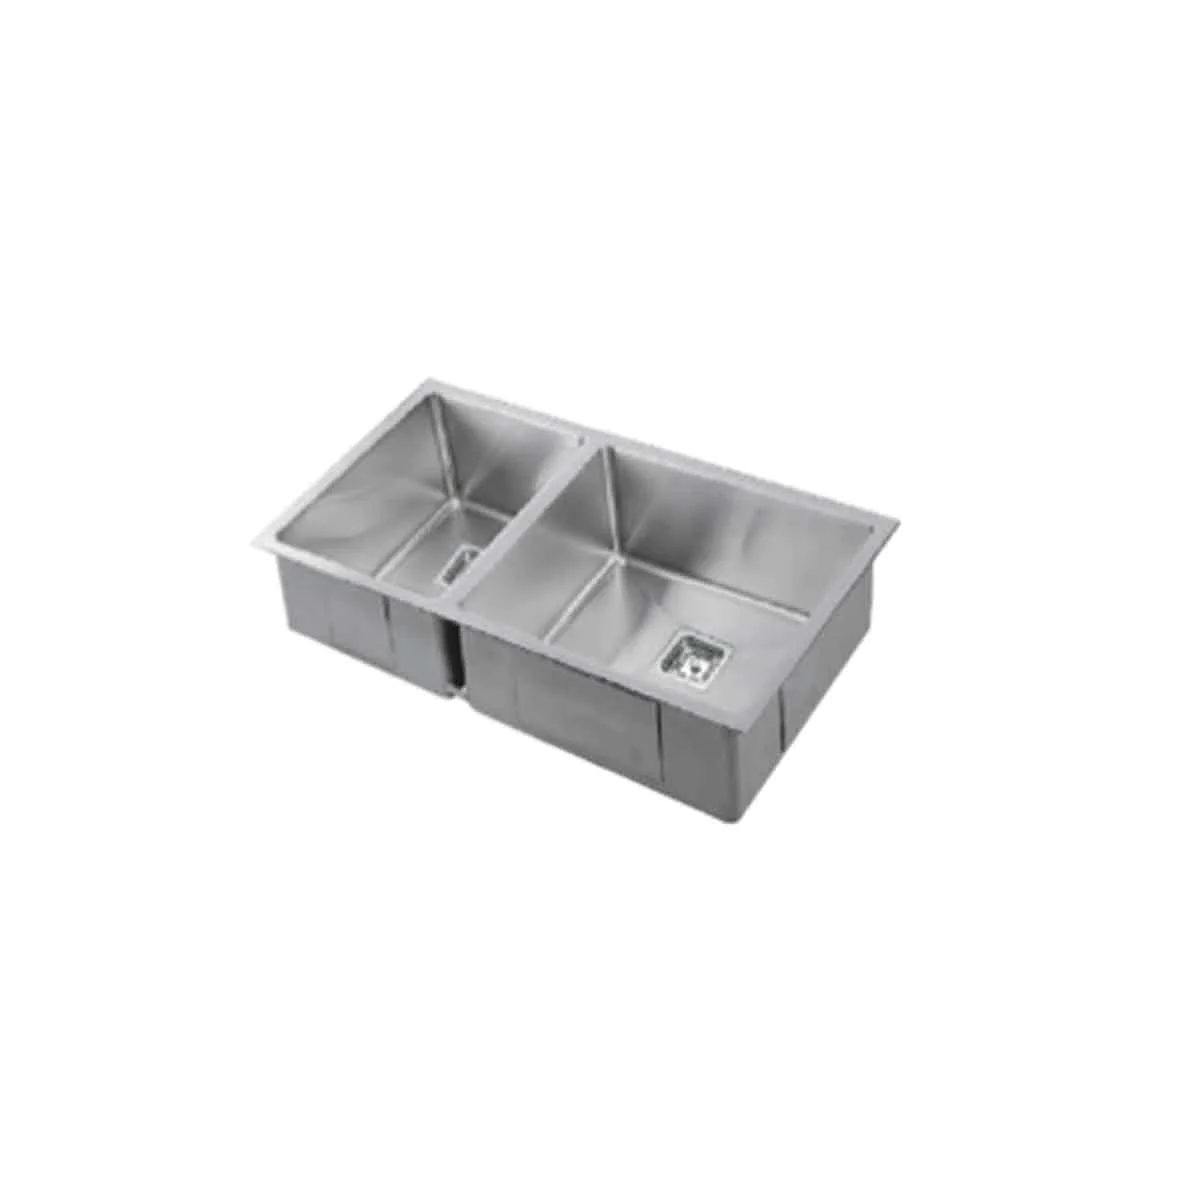 VEROTTI INOX 1 1/2 BOWL UNIVERSAL STAINLESS STEEL KITCHEN SINK GUN METAL 670MM (AVAILABLE IN LEFT OR RIGHT CONFIGURATION)